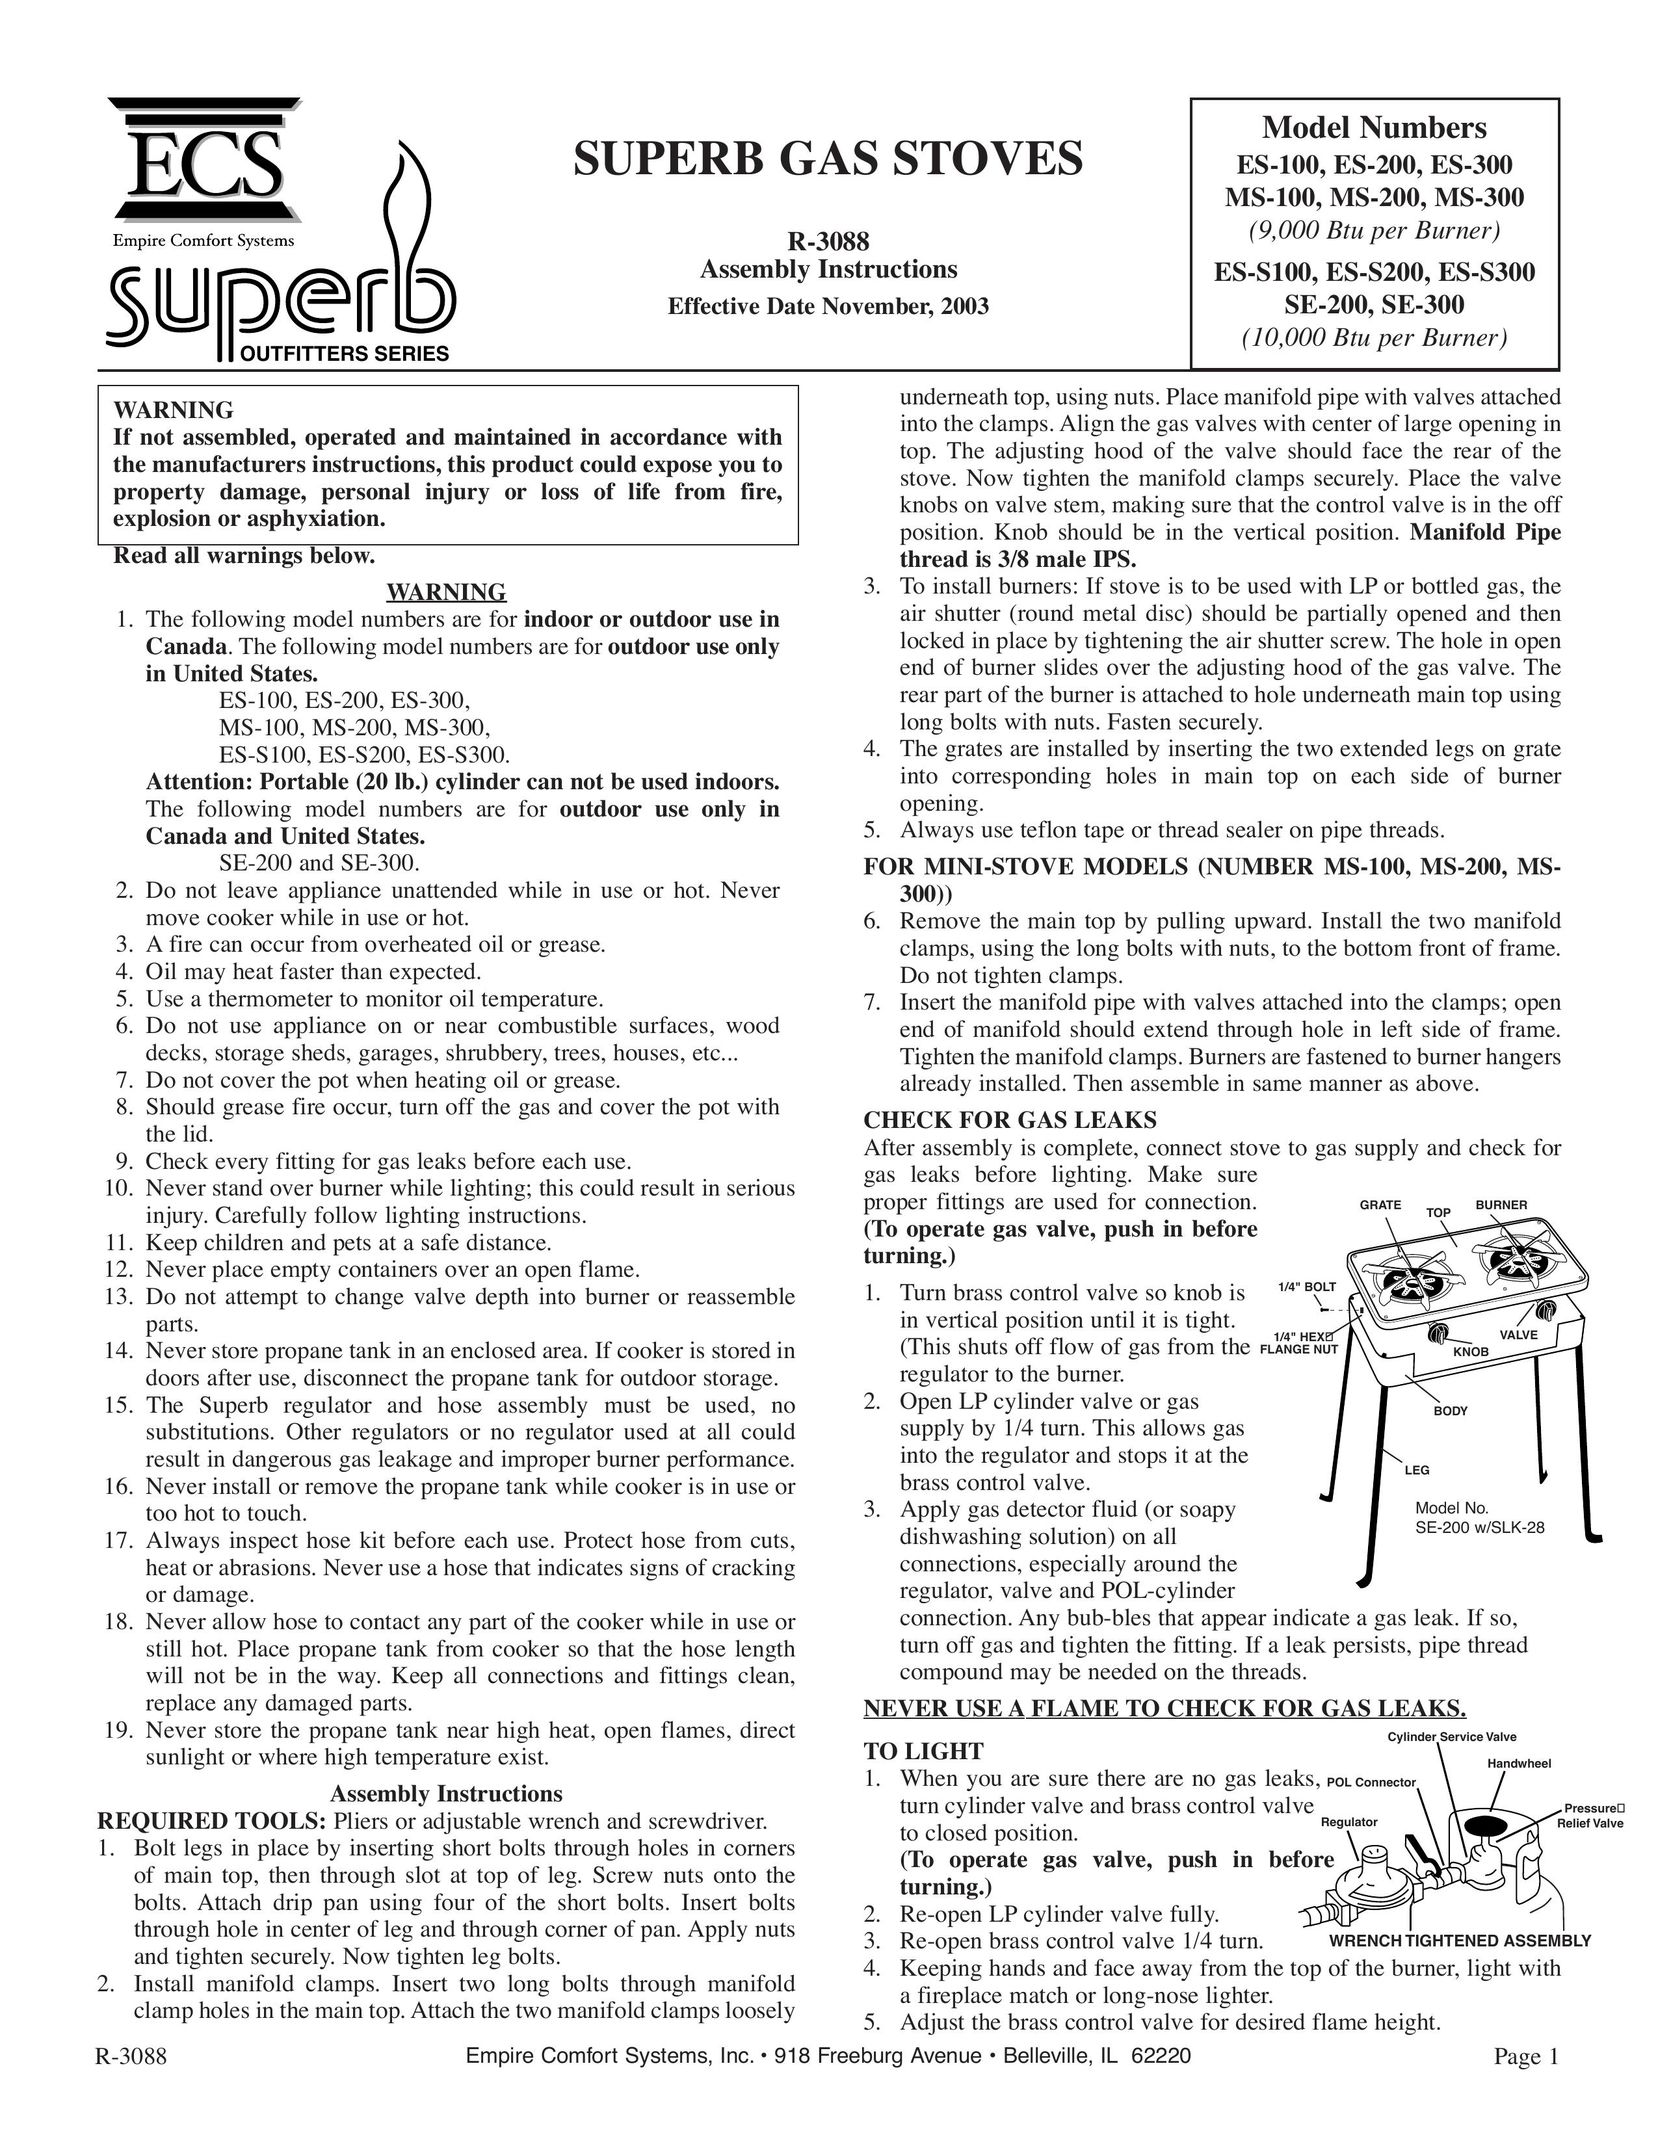 Empire Comfort Systems ES-S100 Stove User Manual